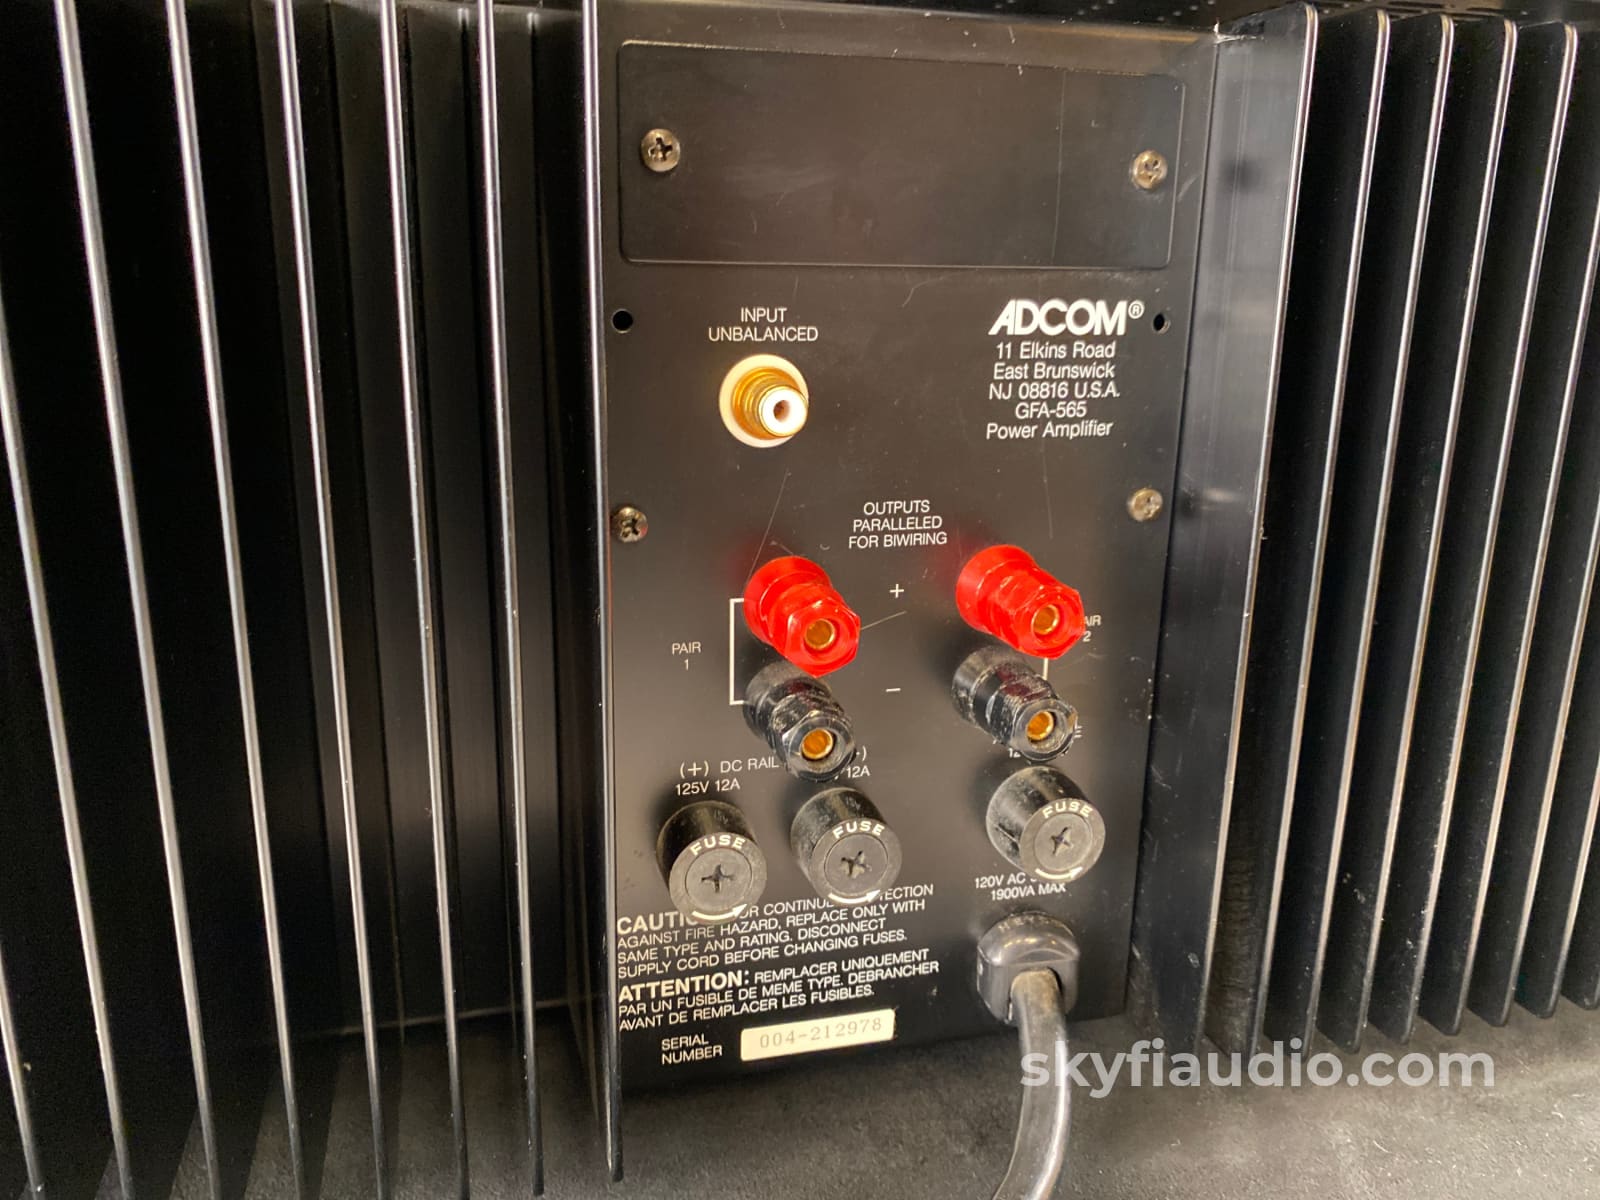 Adcom Gfa-565 Monoblocks - Fully Serviced With New Driver Boards And Original Boxes Amplifier